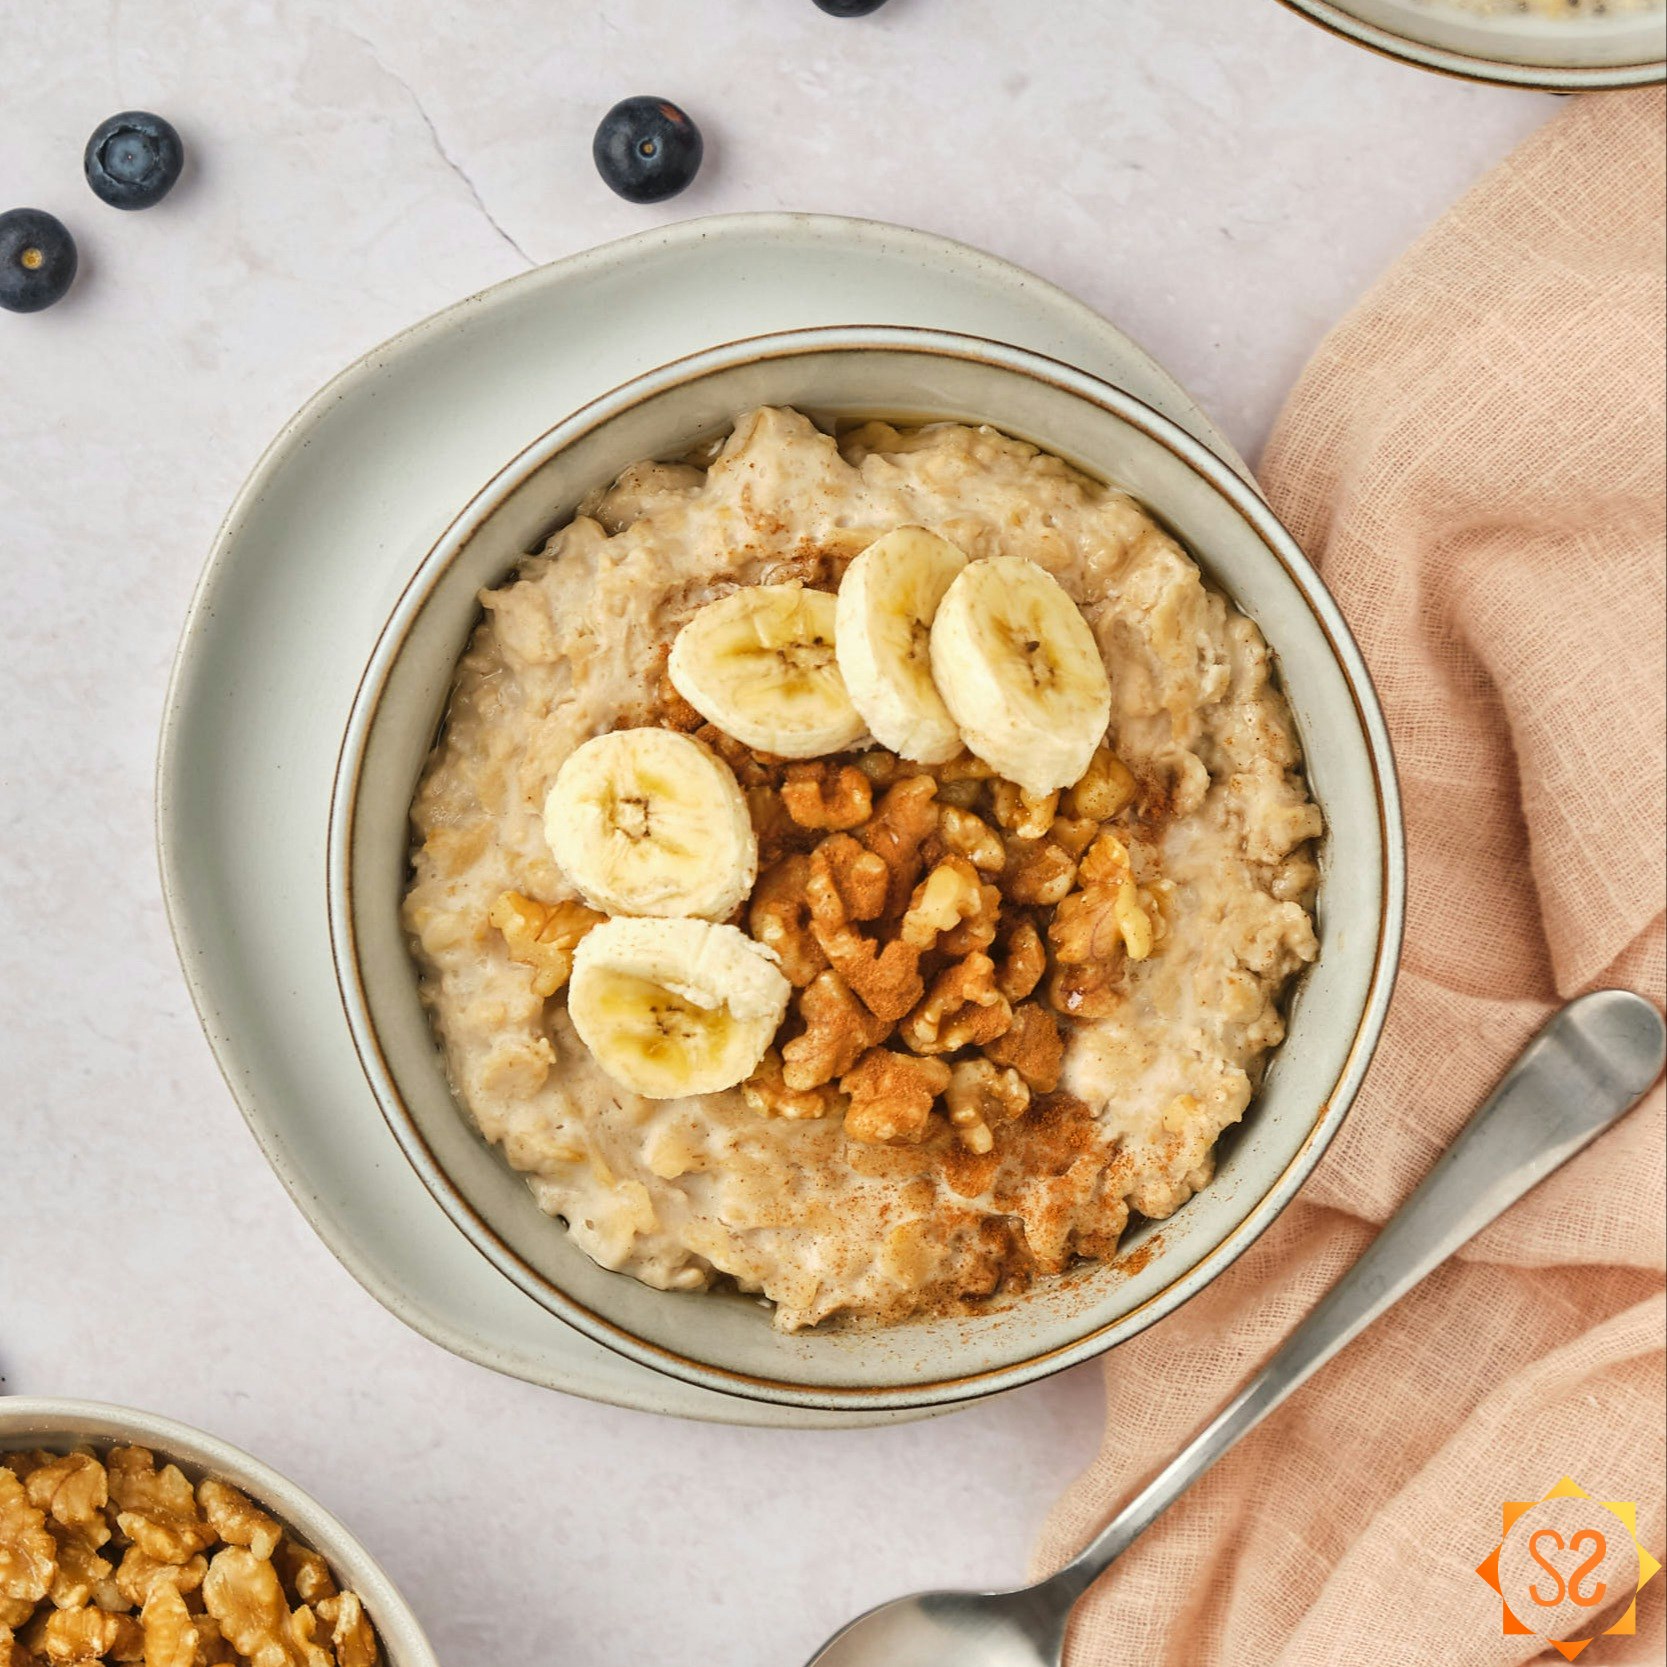 A top-down view of a bowl of high-protein oatmeal topped with bananas and walnuts.